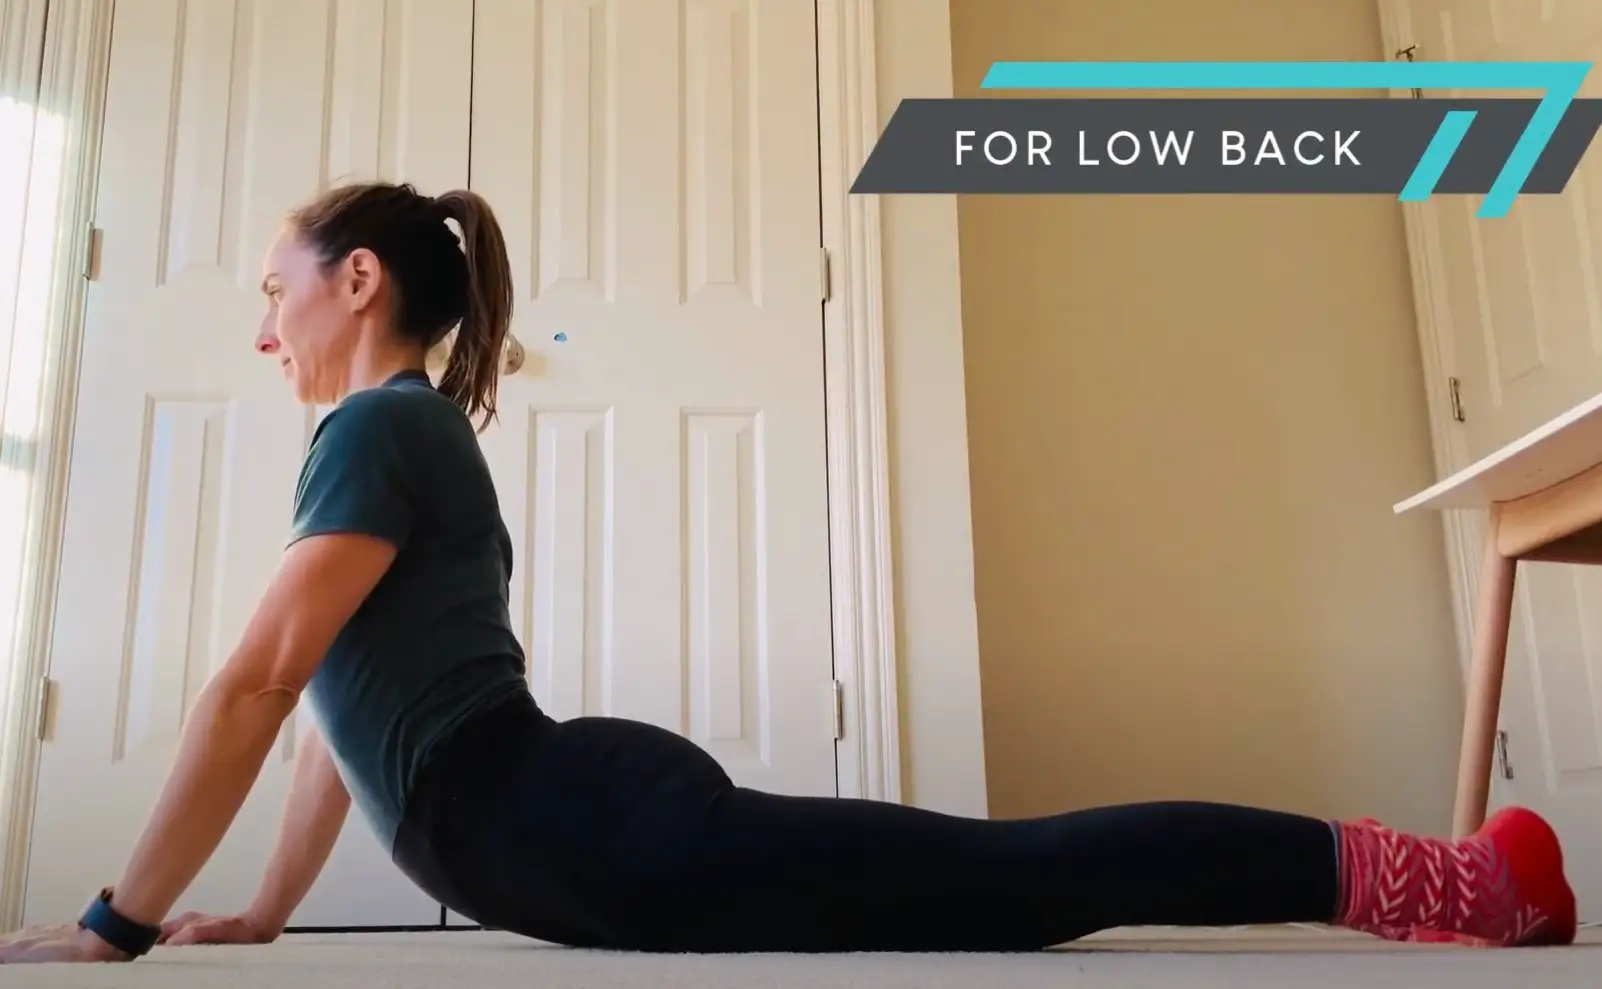 Lower back stretch exercises